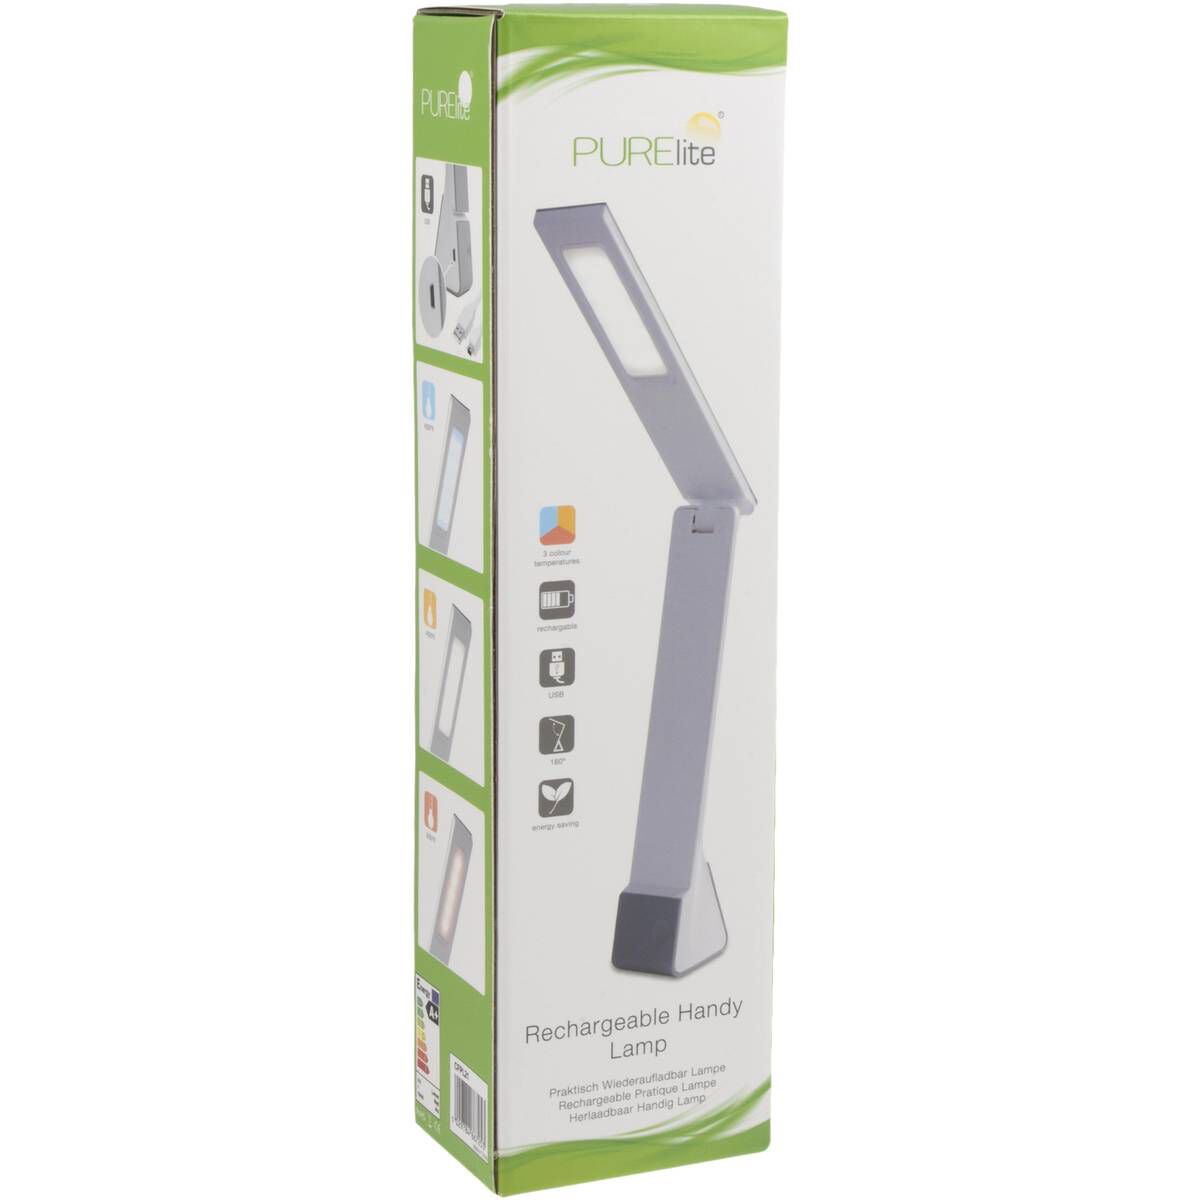 Daylight IFOLD2 Rechargeable  High Definition Battery Operated Folding LAMP. 